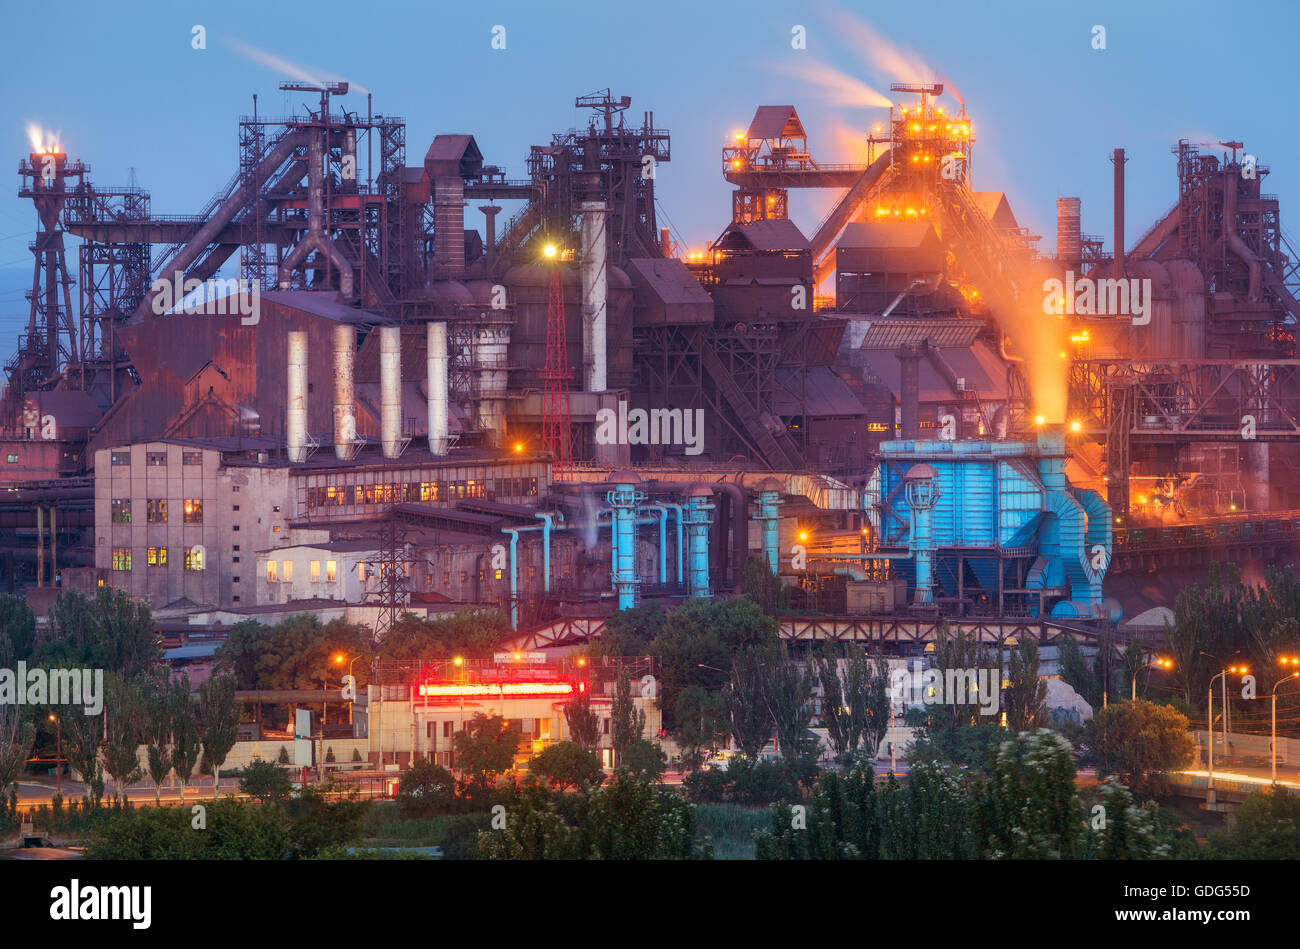 Metallurgical plant at night. Steel factory with smokestacks . Steelworks, iron works. Heavy industry in Europe. Air pollution f Stock Photo